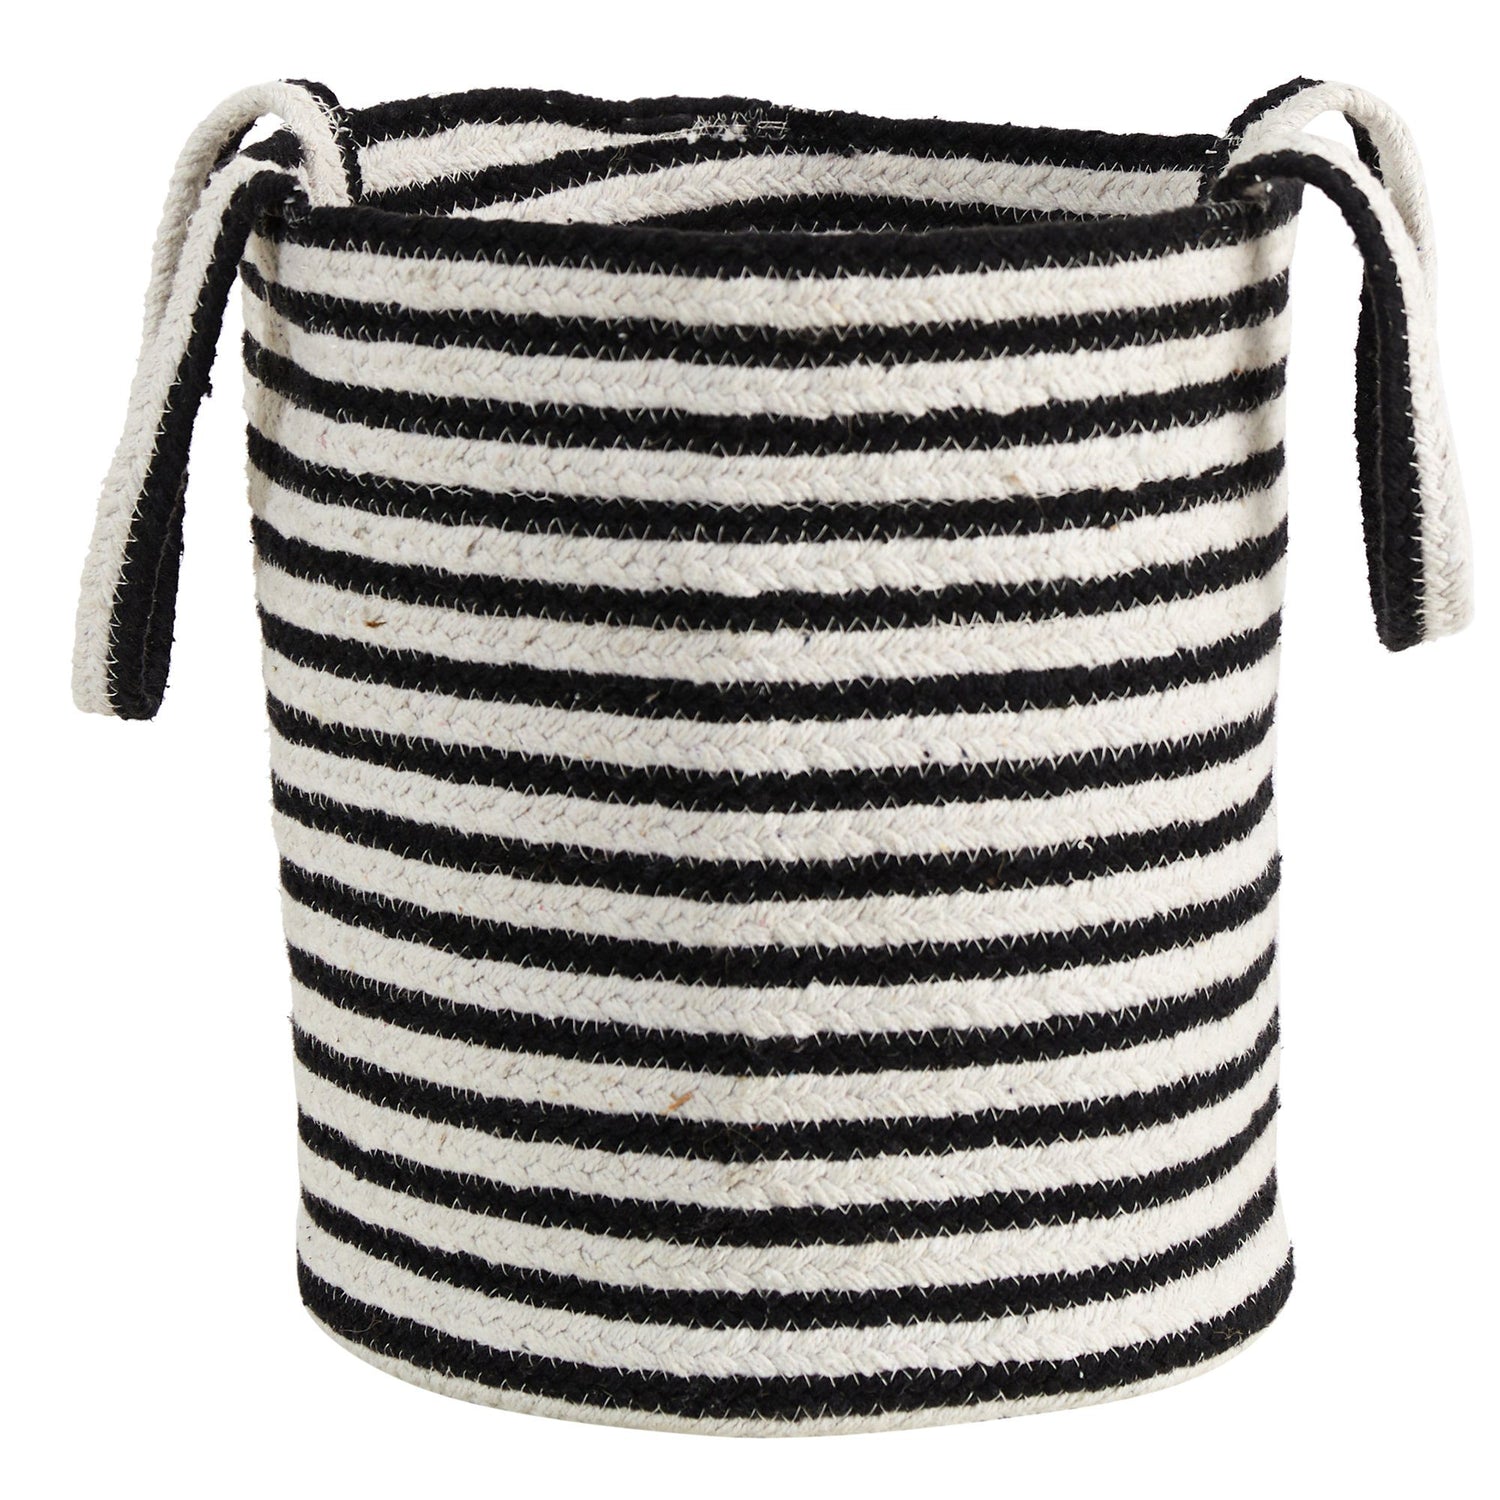 13” Boho Chic Basket Natural Cotton, Handwoven Black and White Stripe with Handles